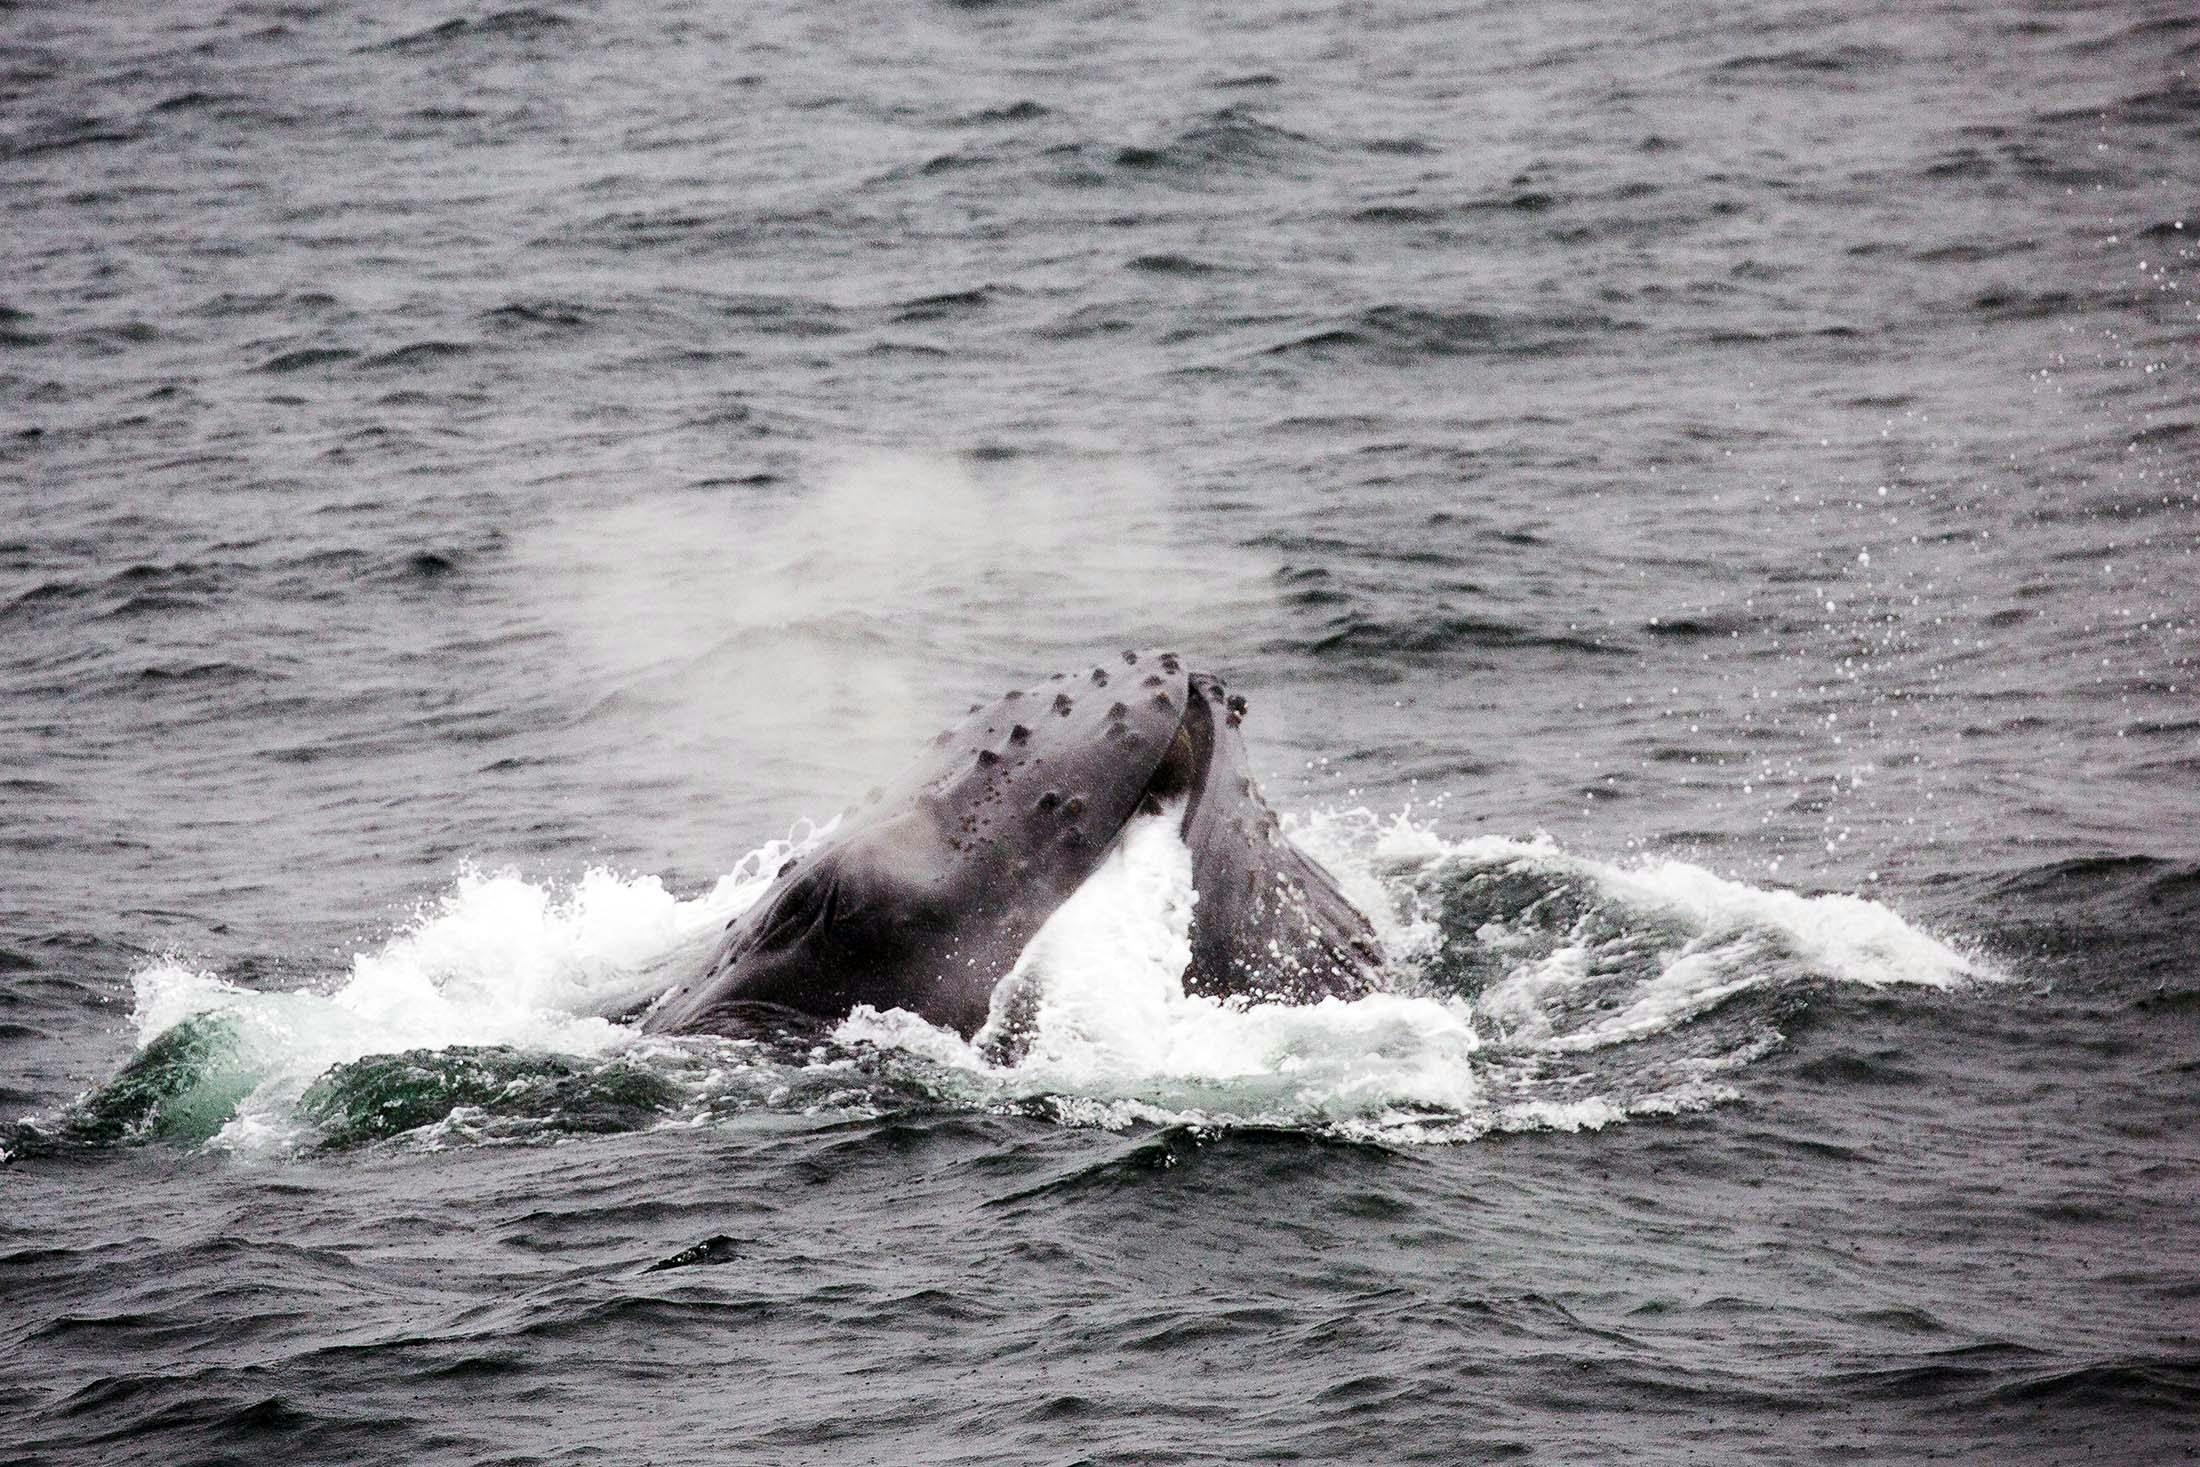 Guests on a Silversea cruise watch a humpback whale hunt with a bubble net in Portal Point, Antarctica